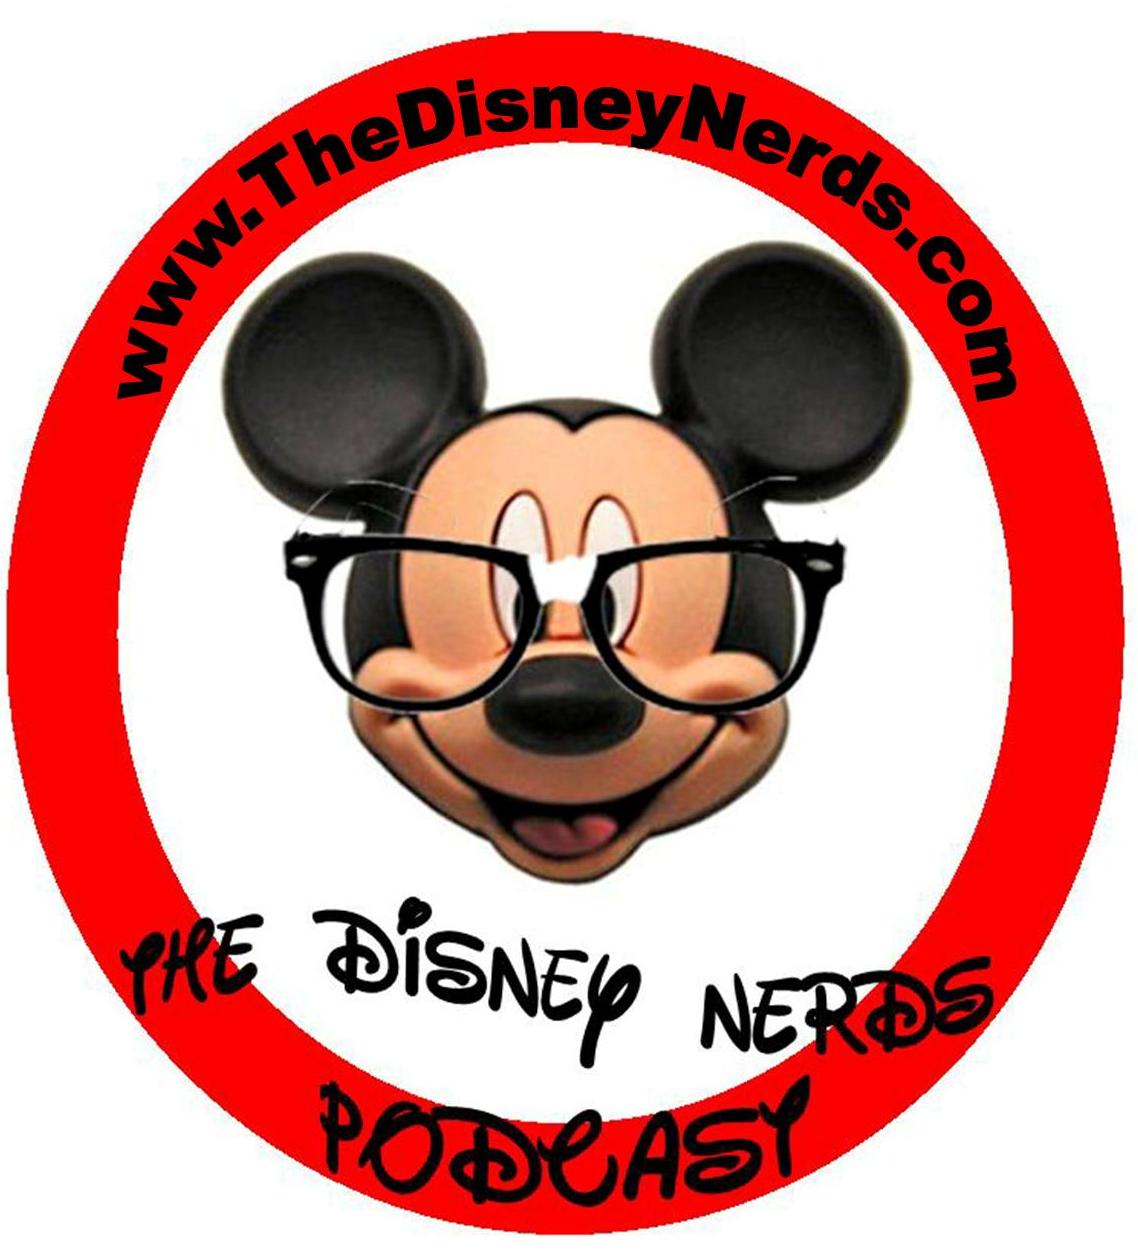 Show # 43 of the Disney Nerds Podcast